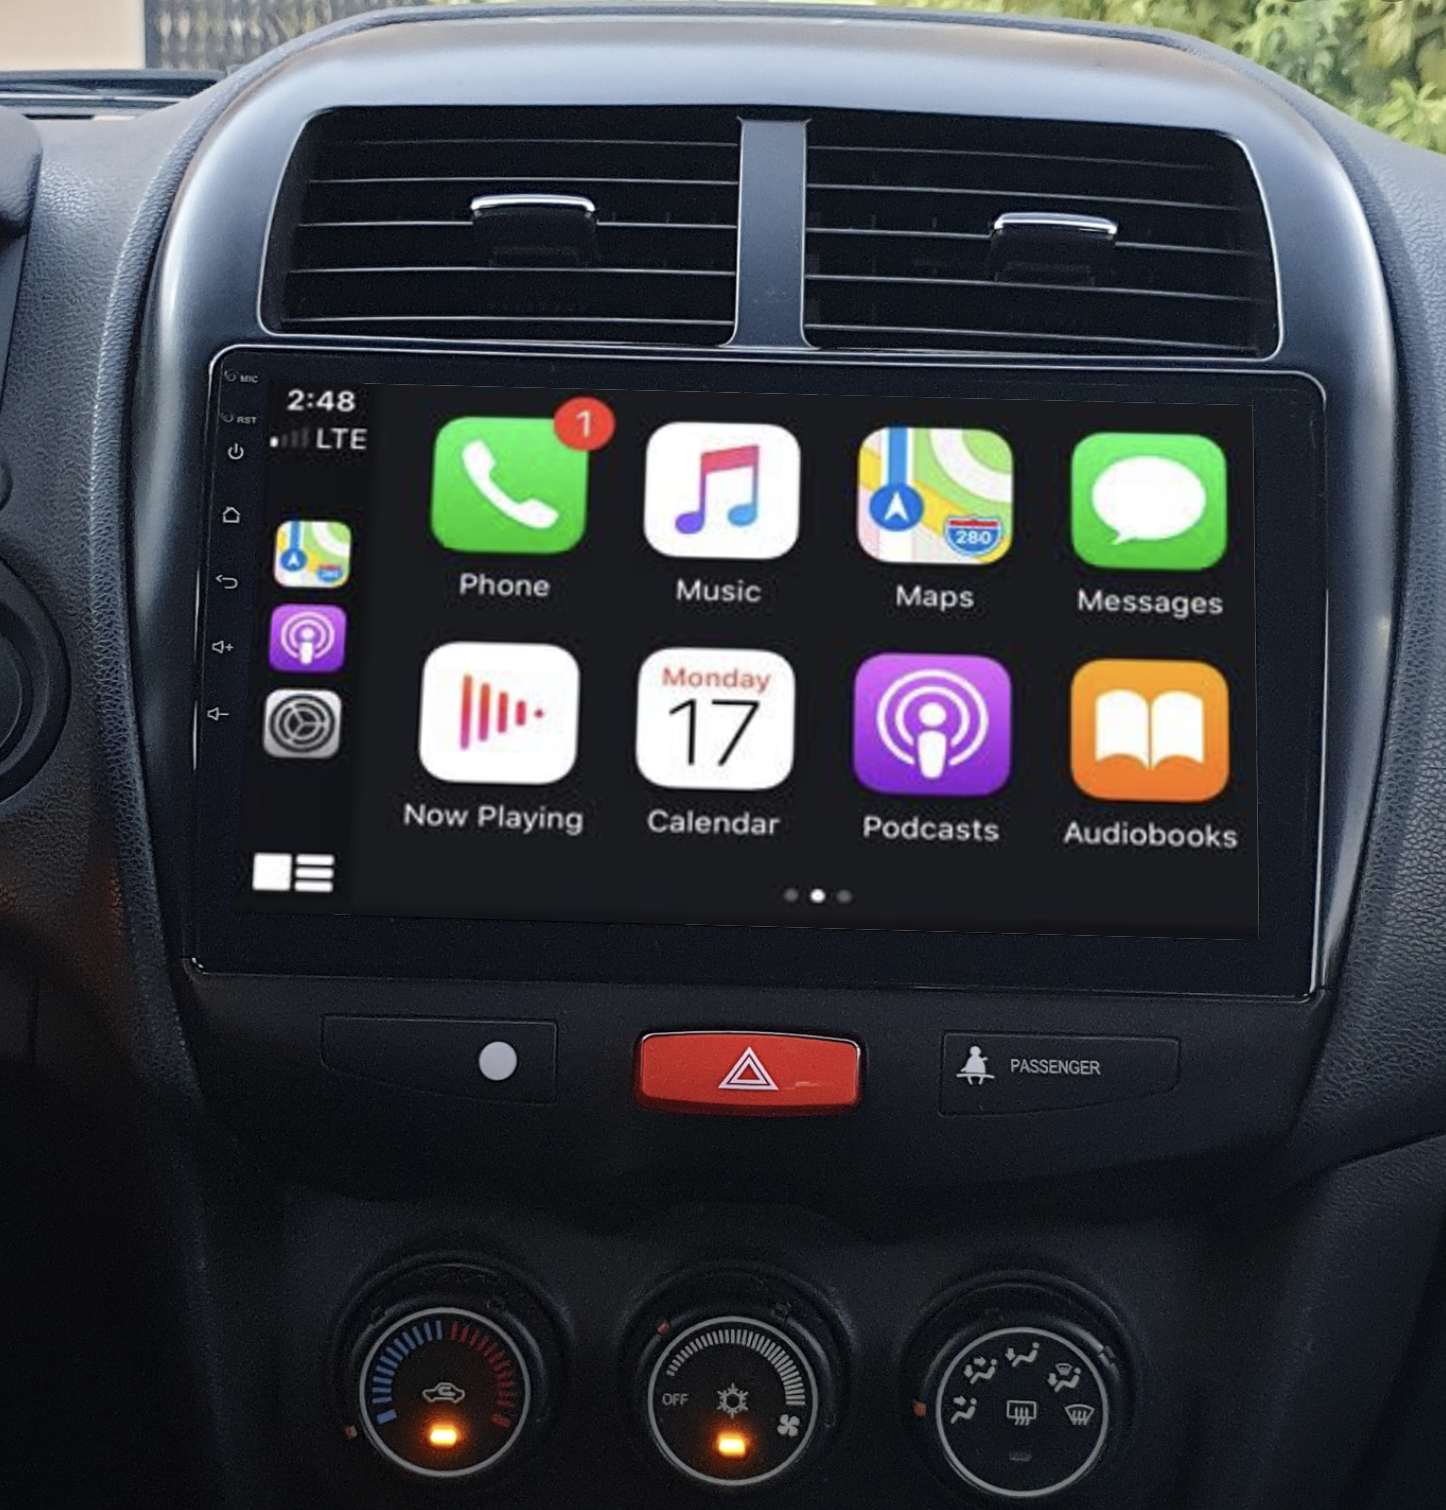 Tablette tactile Android 13.0 + Apple Carplay Citroën C4 Aircross